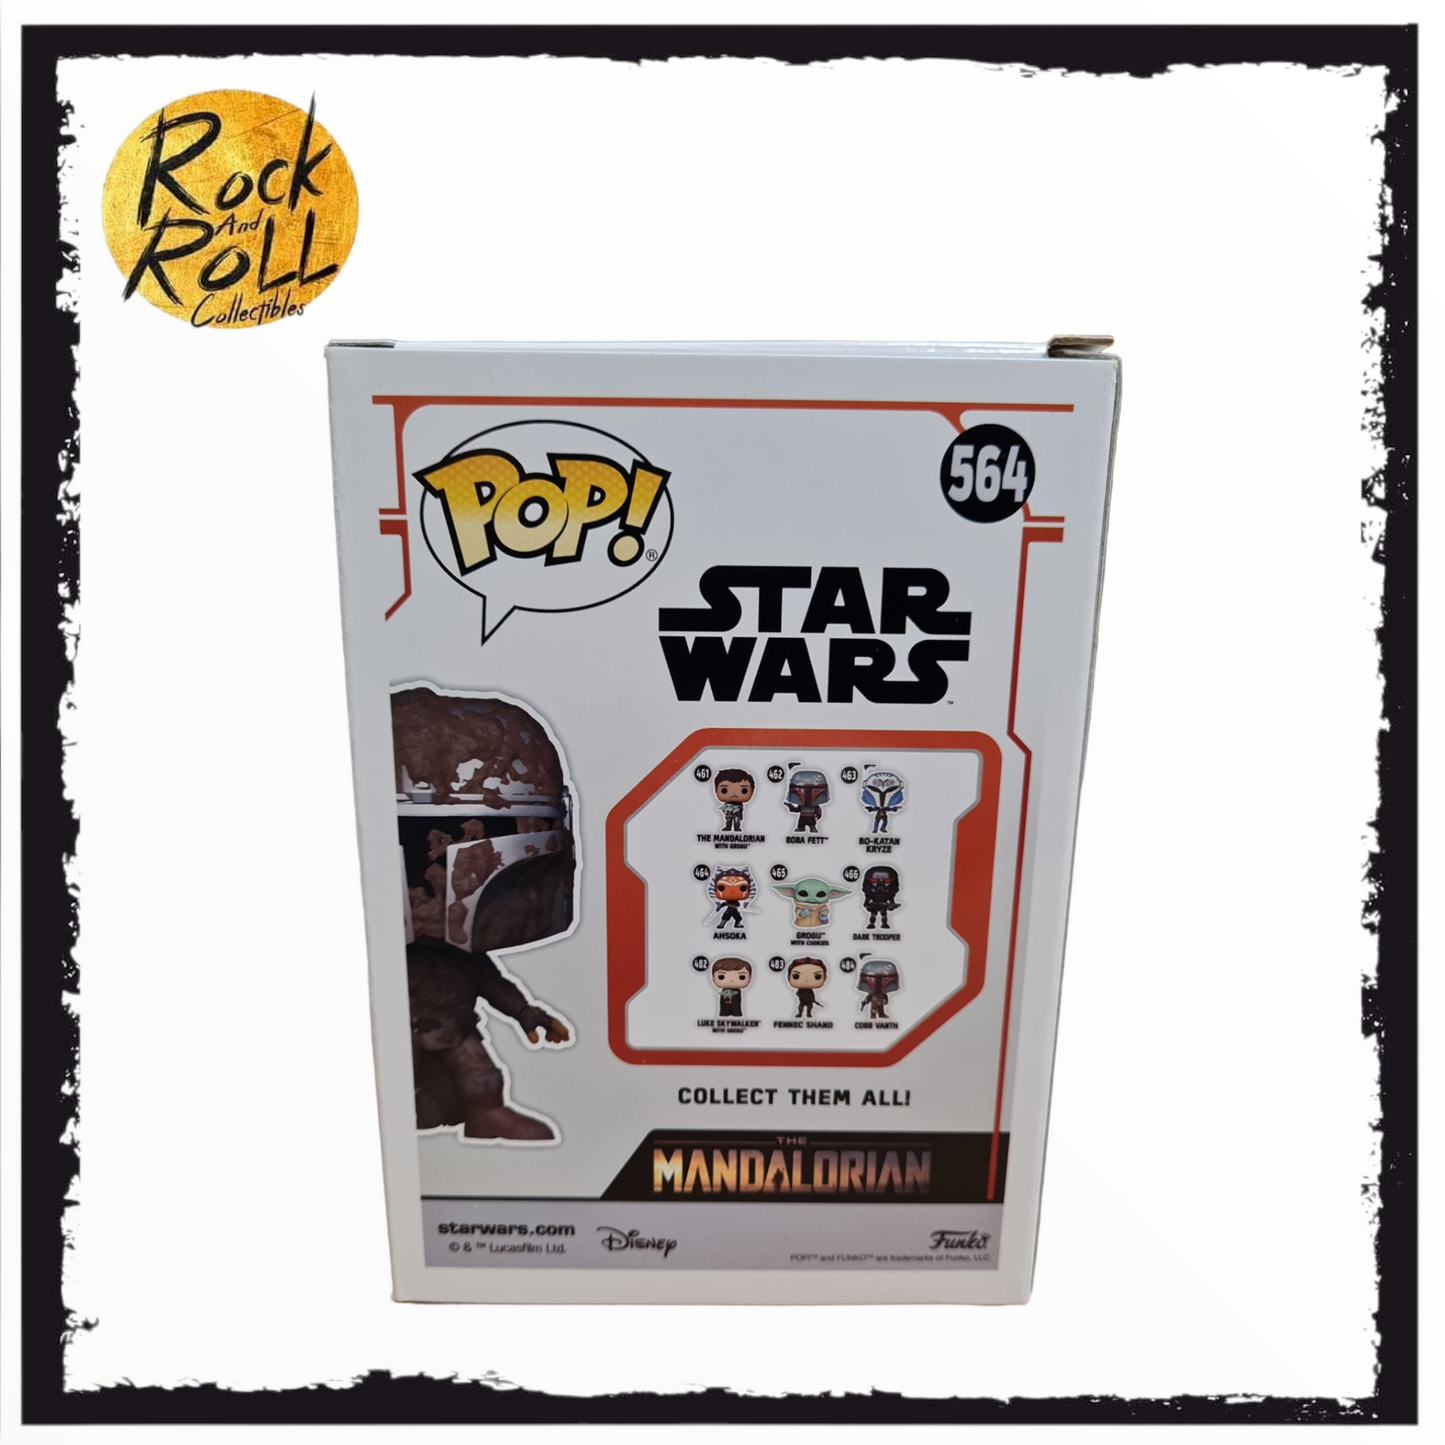 Star Wars - The Mandalorian Mudhorn Battle Funko Pop! #564 Game Stop Exclusive Condition 8.75/10